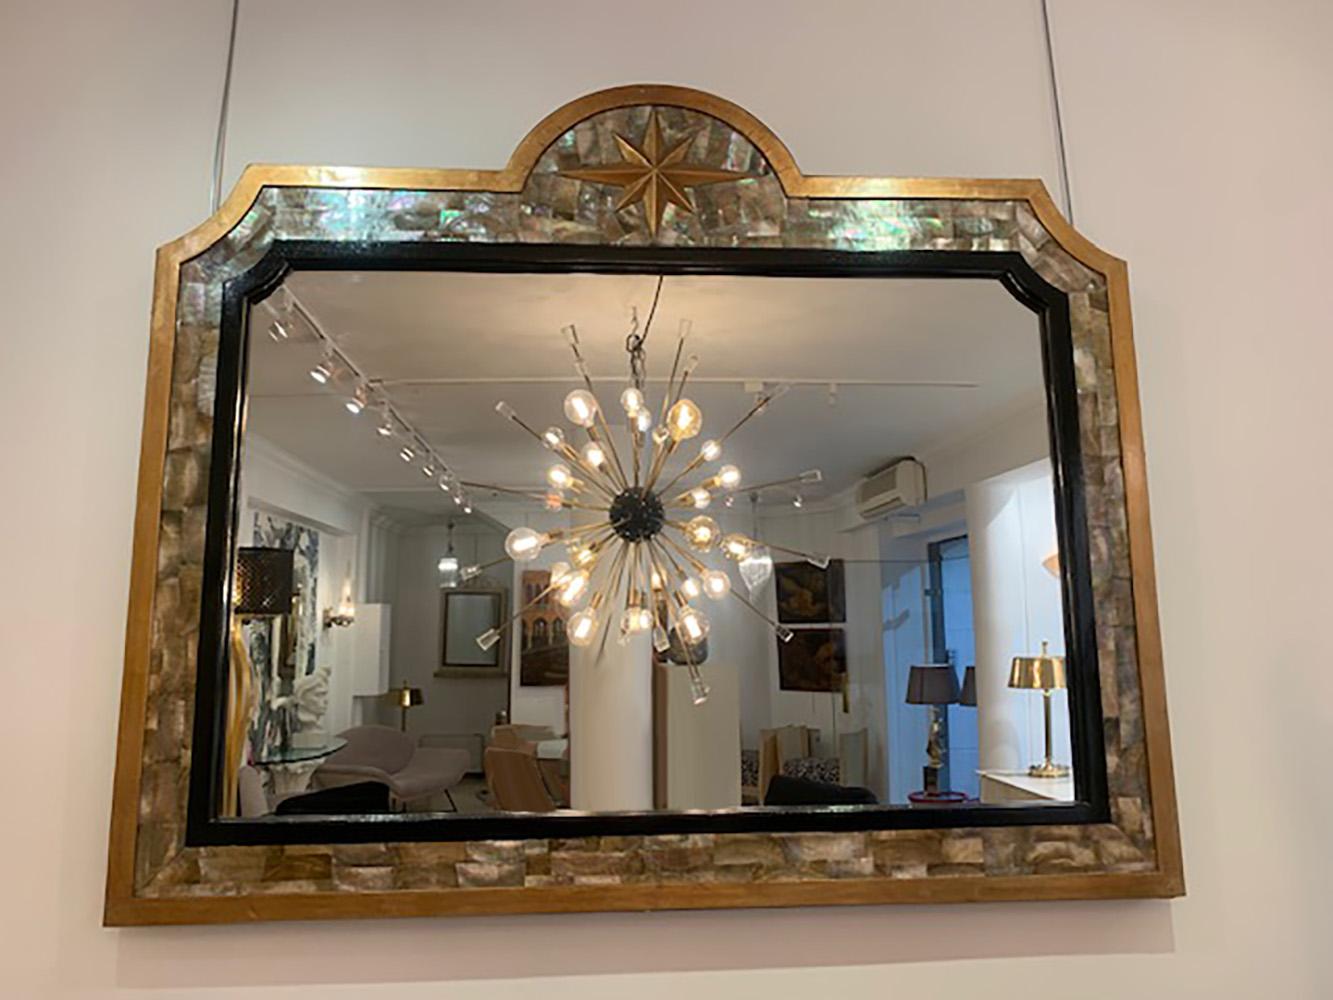 Wooden mirror covered with tahitian mother-of-pearl plates, gilded wrought iron and black lacquer. Circa 1970. 
Measures: H 113
L 137
4800 euros.